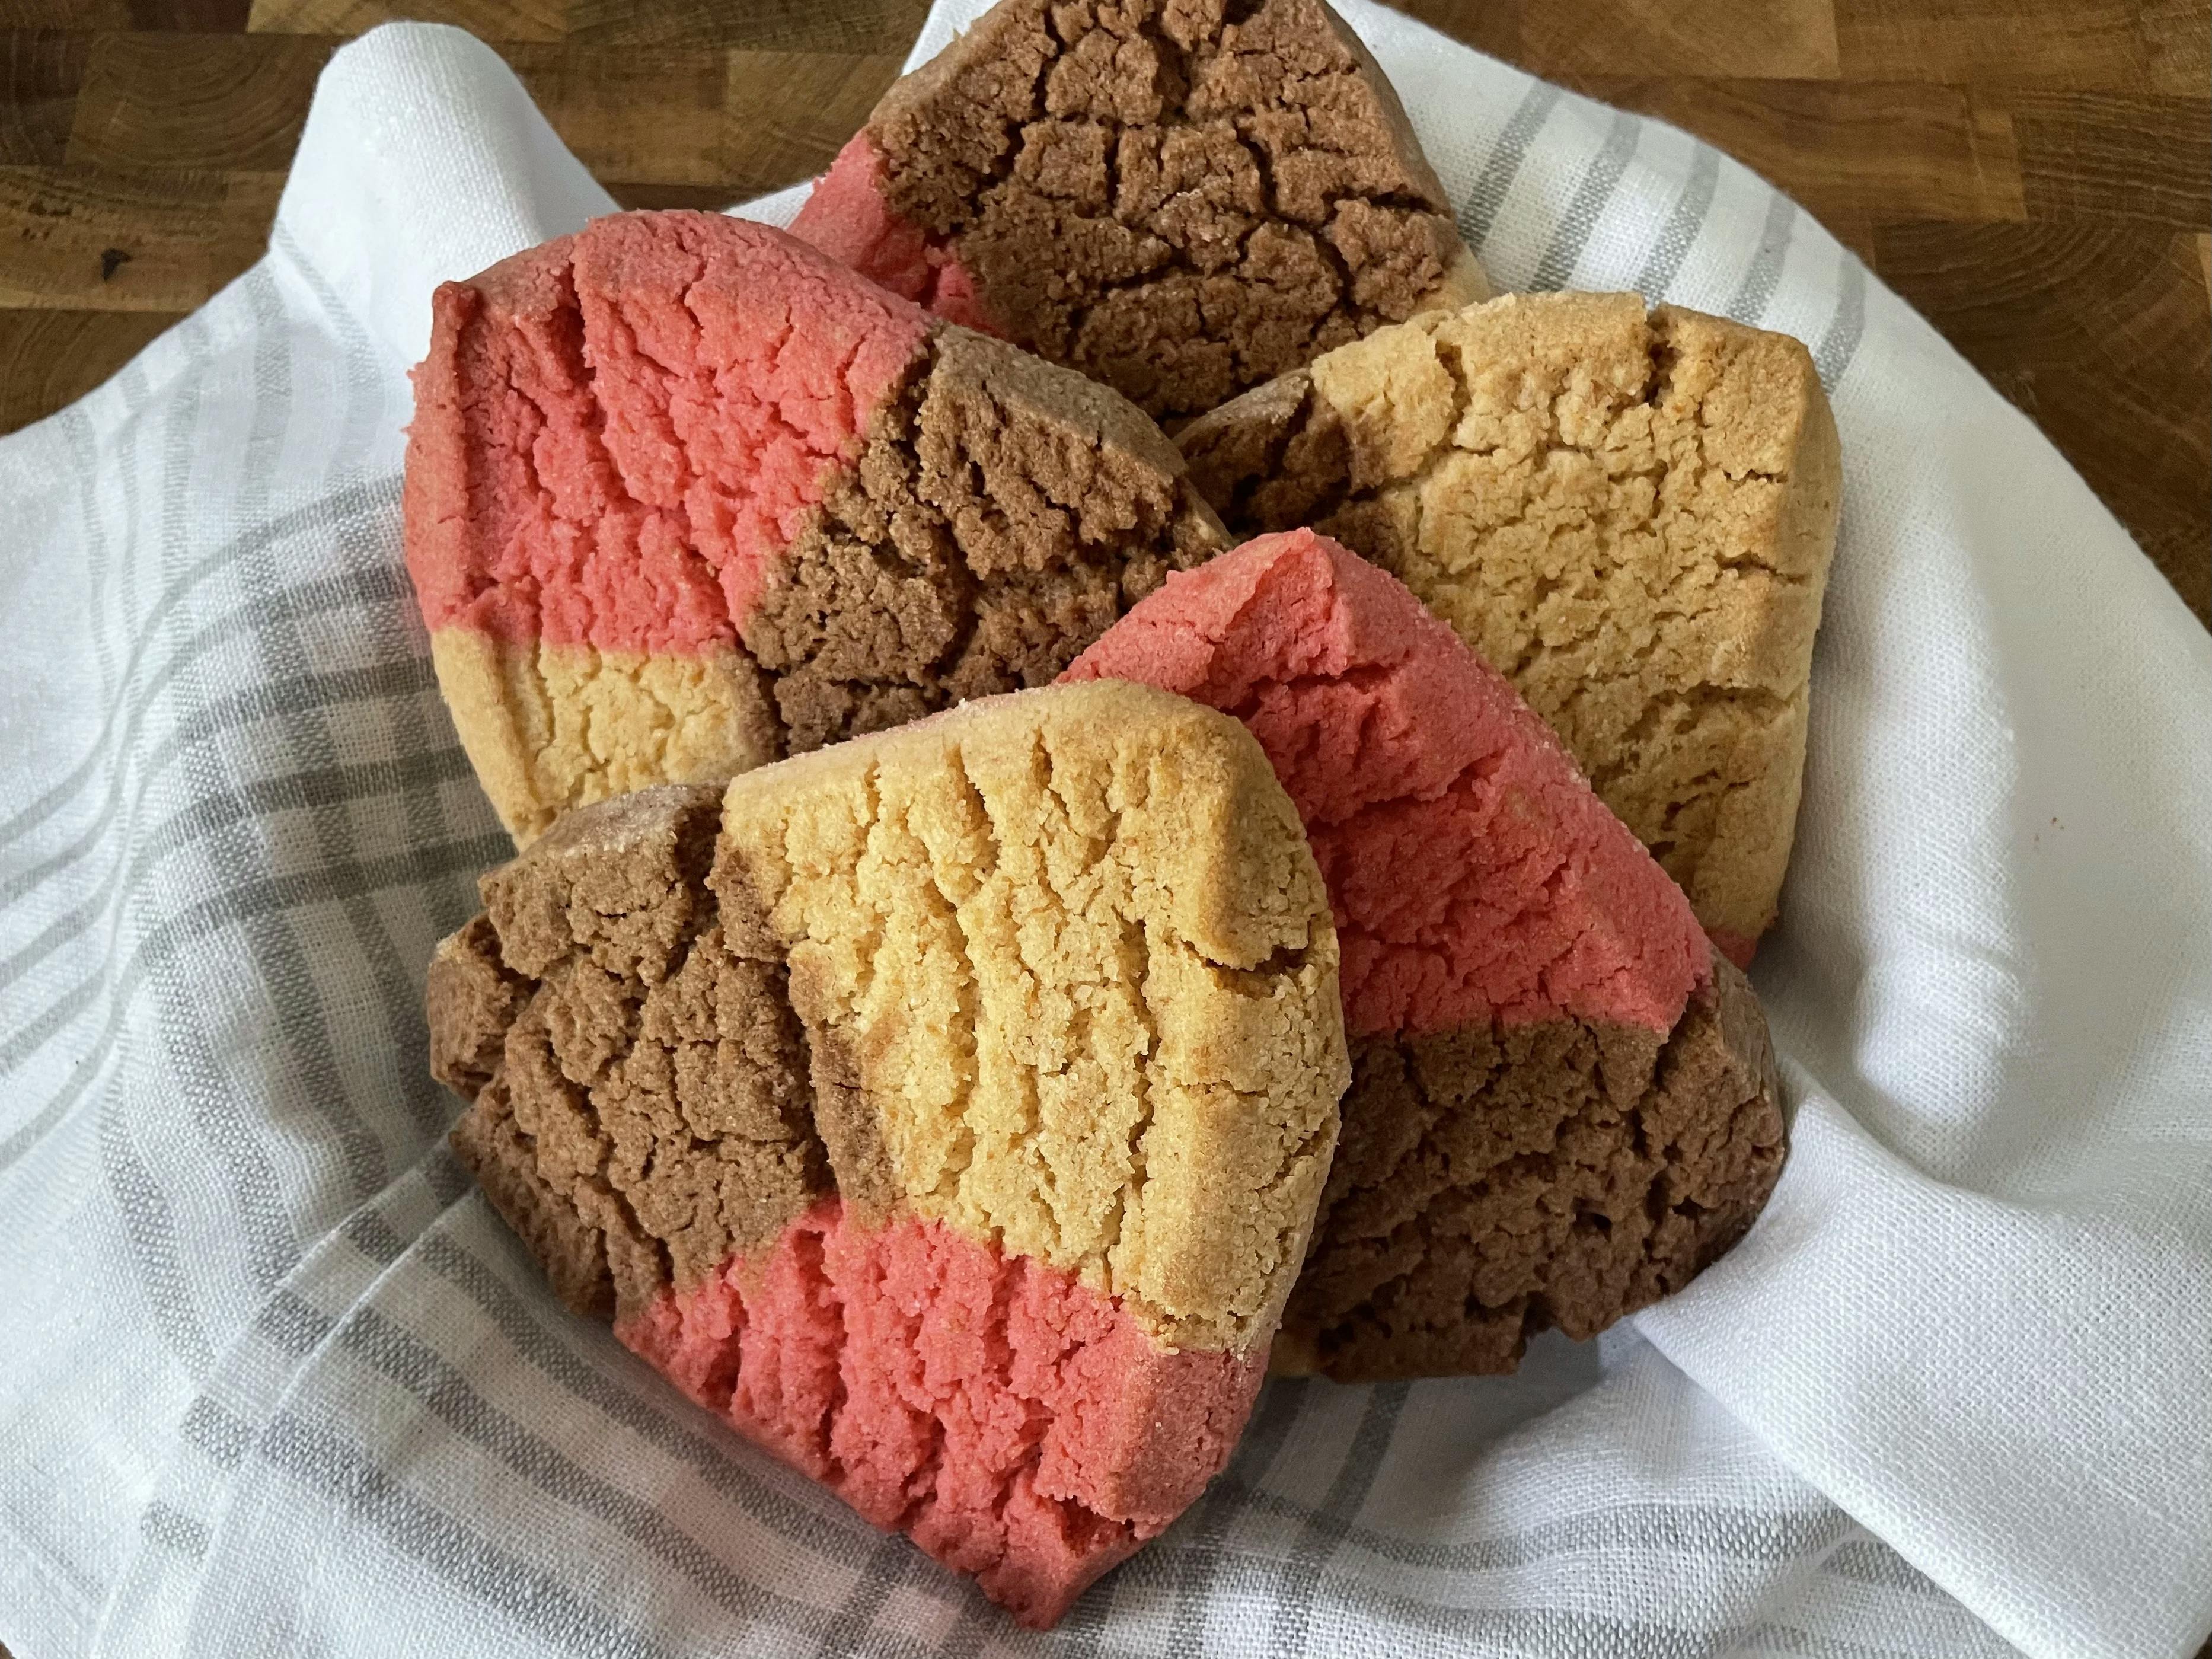 Picture of Polvoron Napolitano - Mexican Pan Dulce